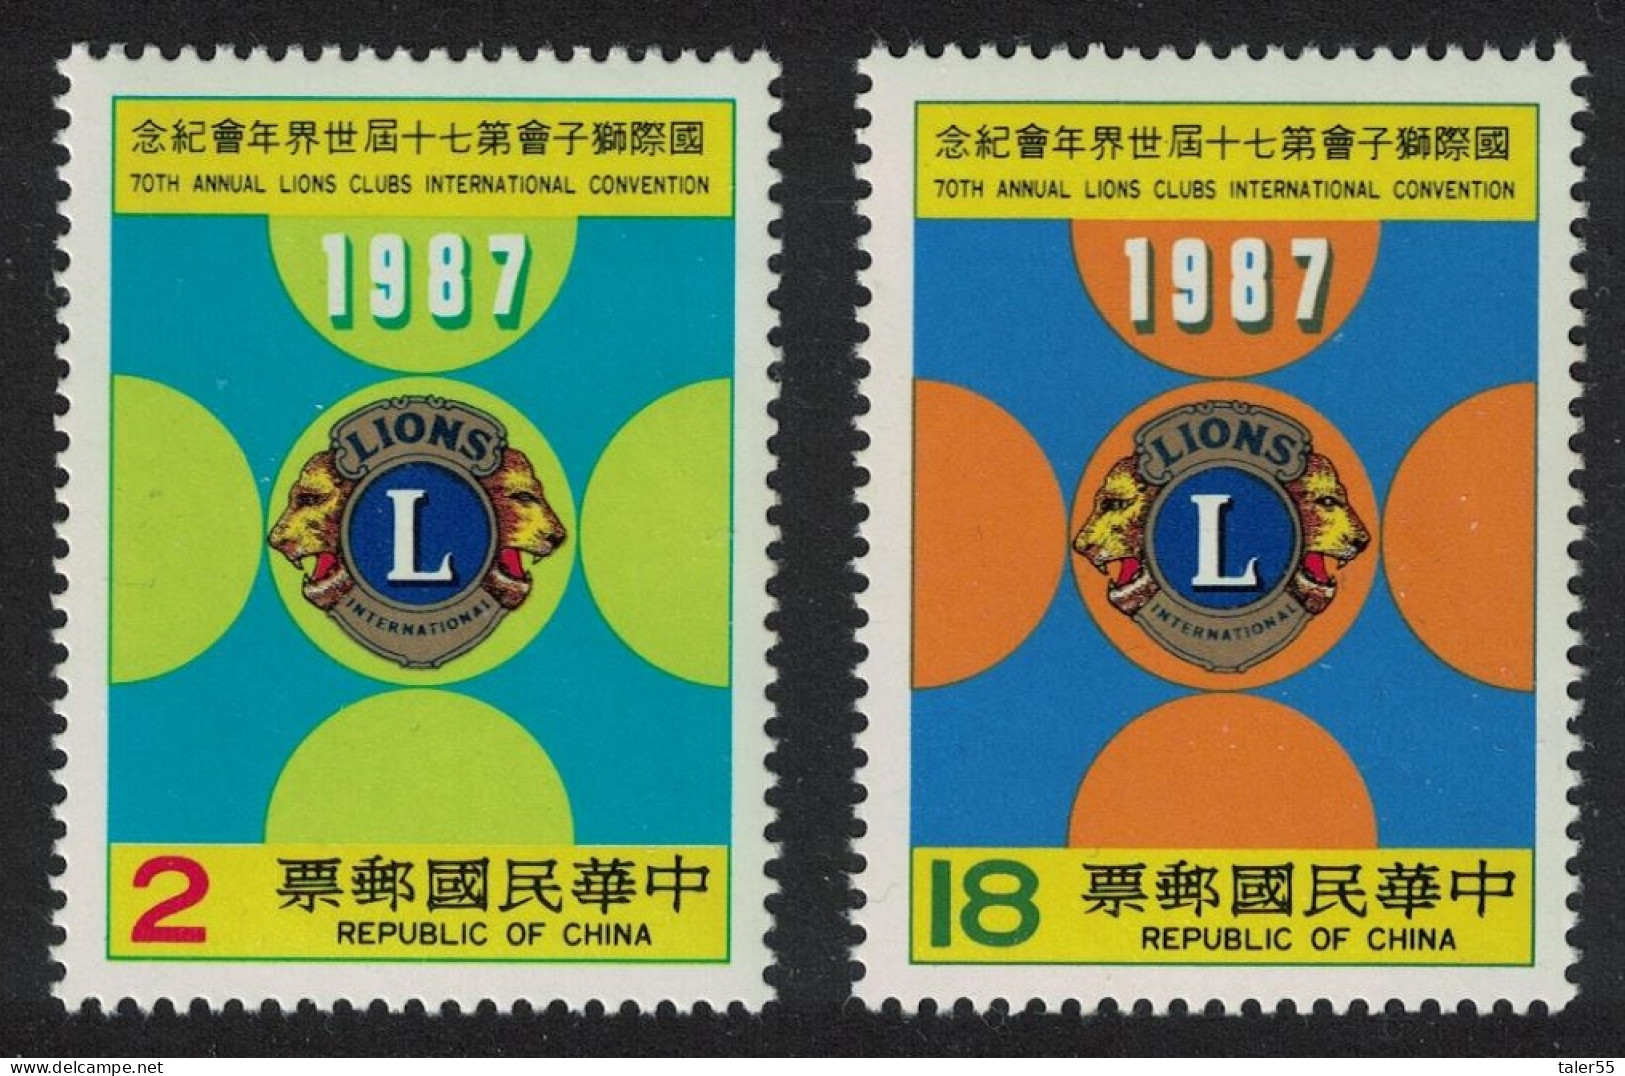 Taiwan Lions Clubs International Convention 2v 1987 MNH SG#1745-1746 - Unused Stamps